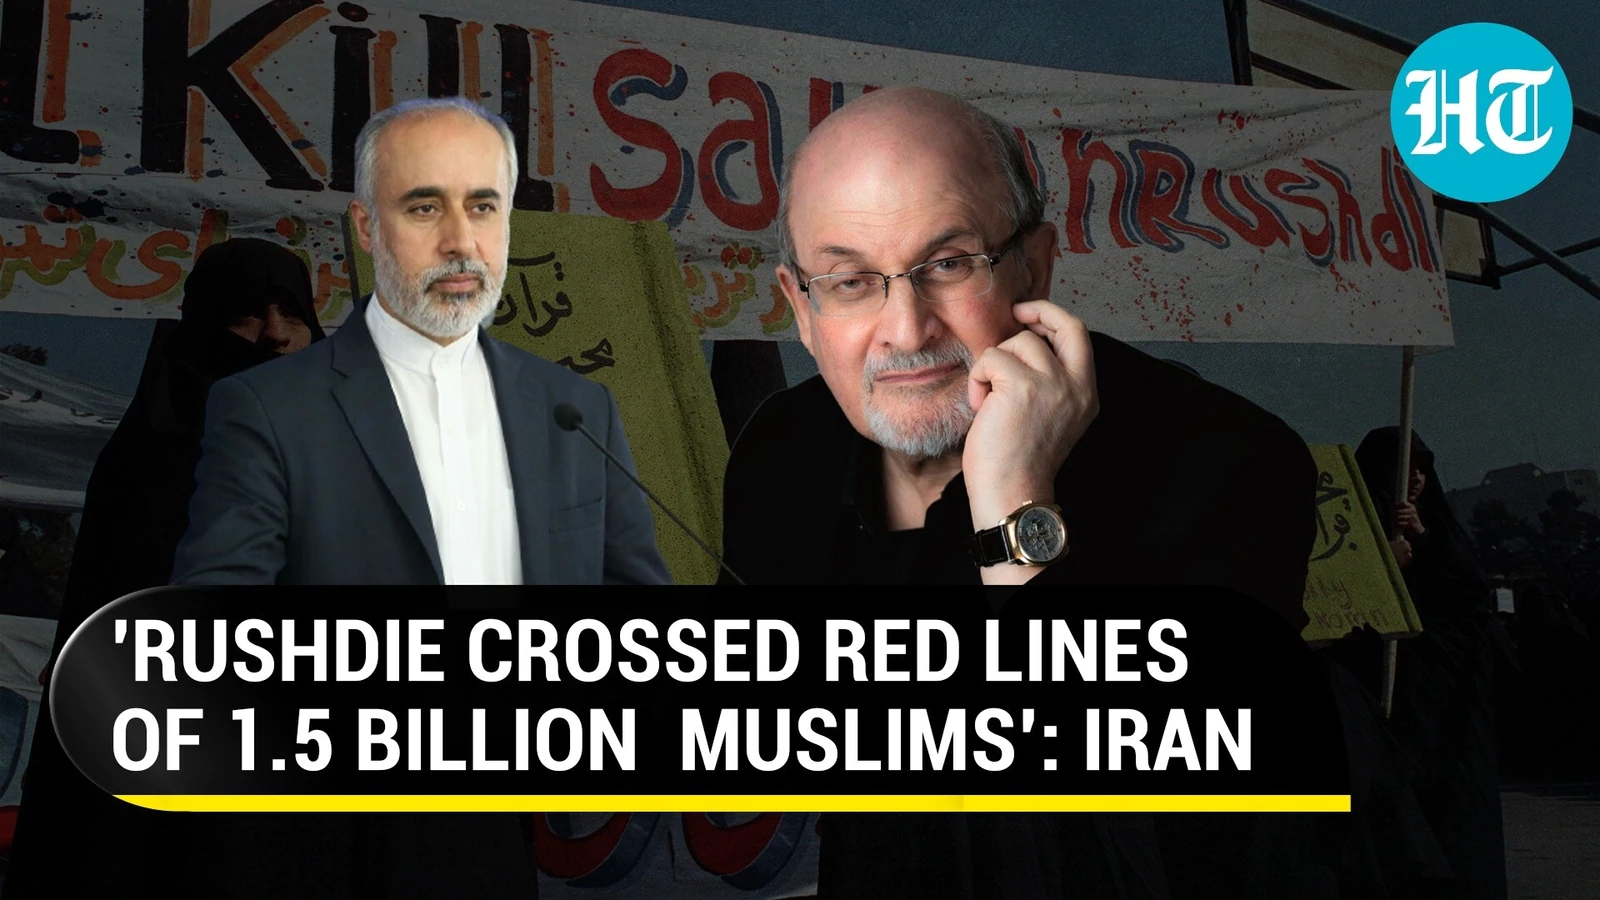 Iran shrugs role in Rushdie attack; Blames author for ‘crossing red lines’